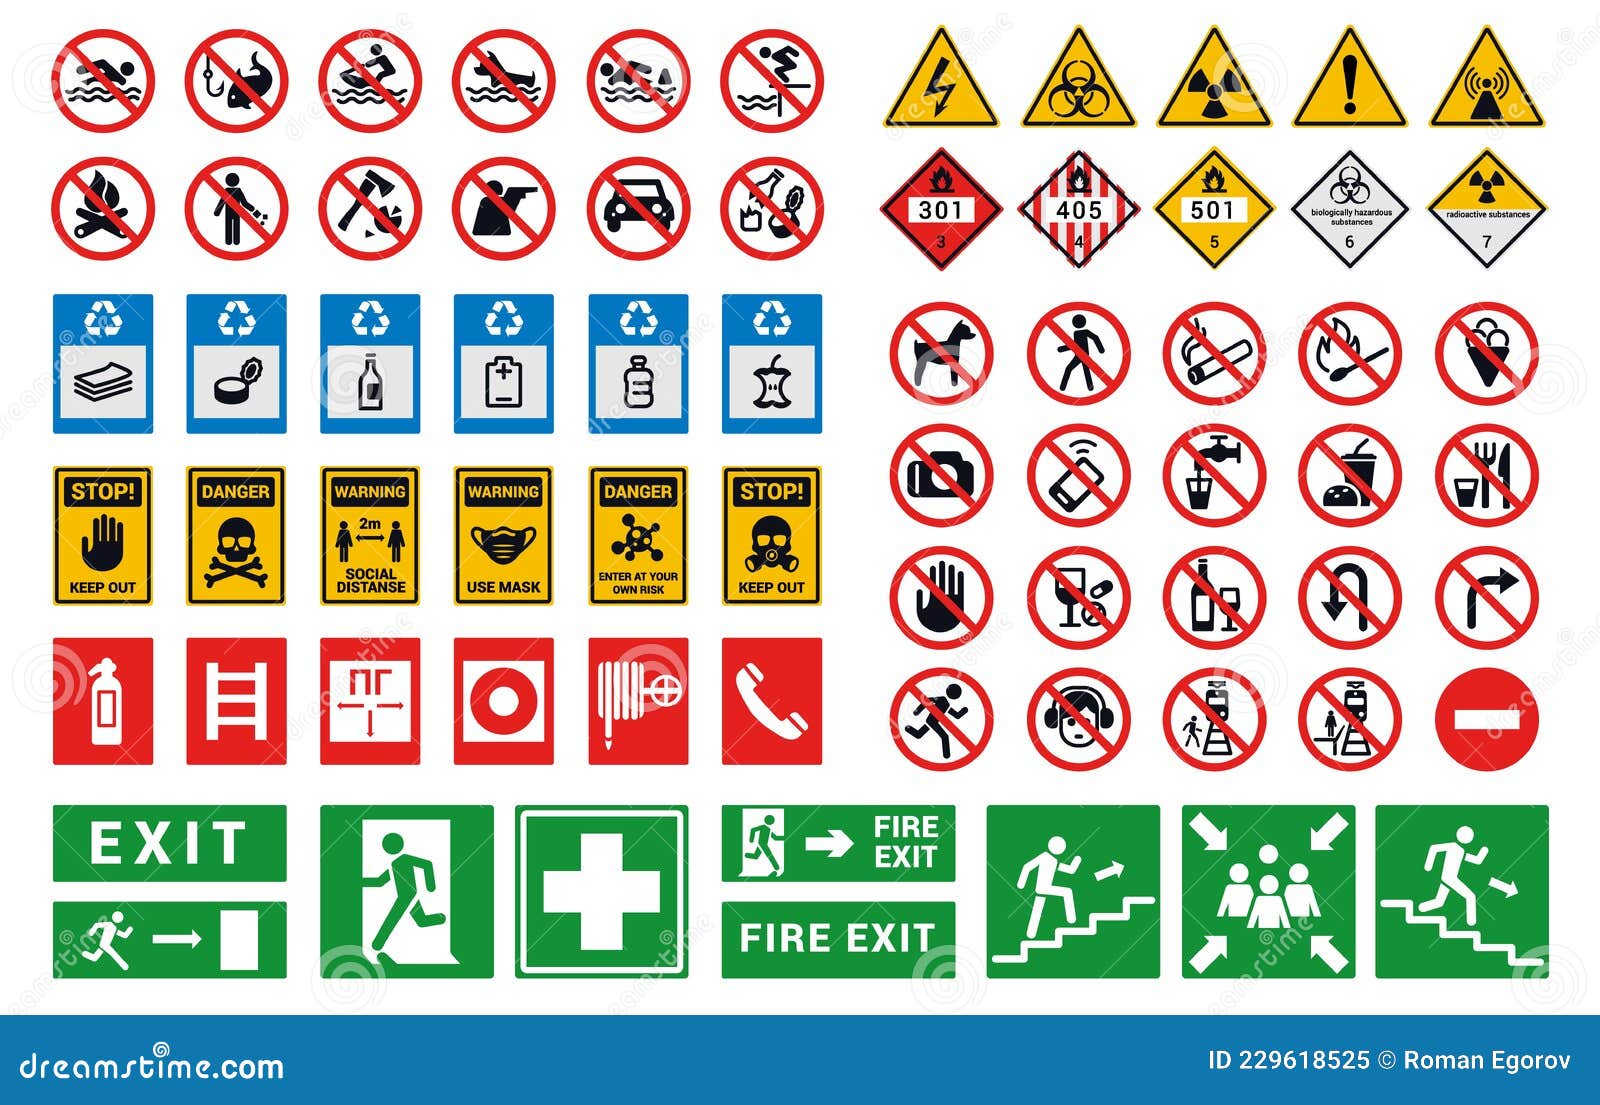 first aid signs/stickers BIOLOGICAL HAZARD health and safety DANGER warning 